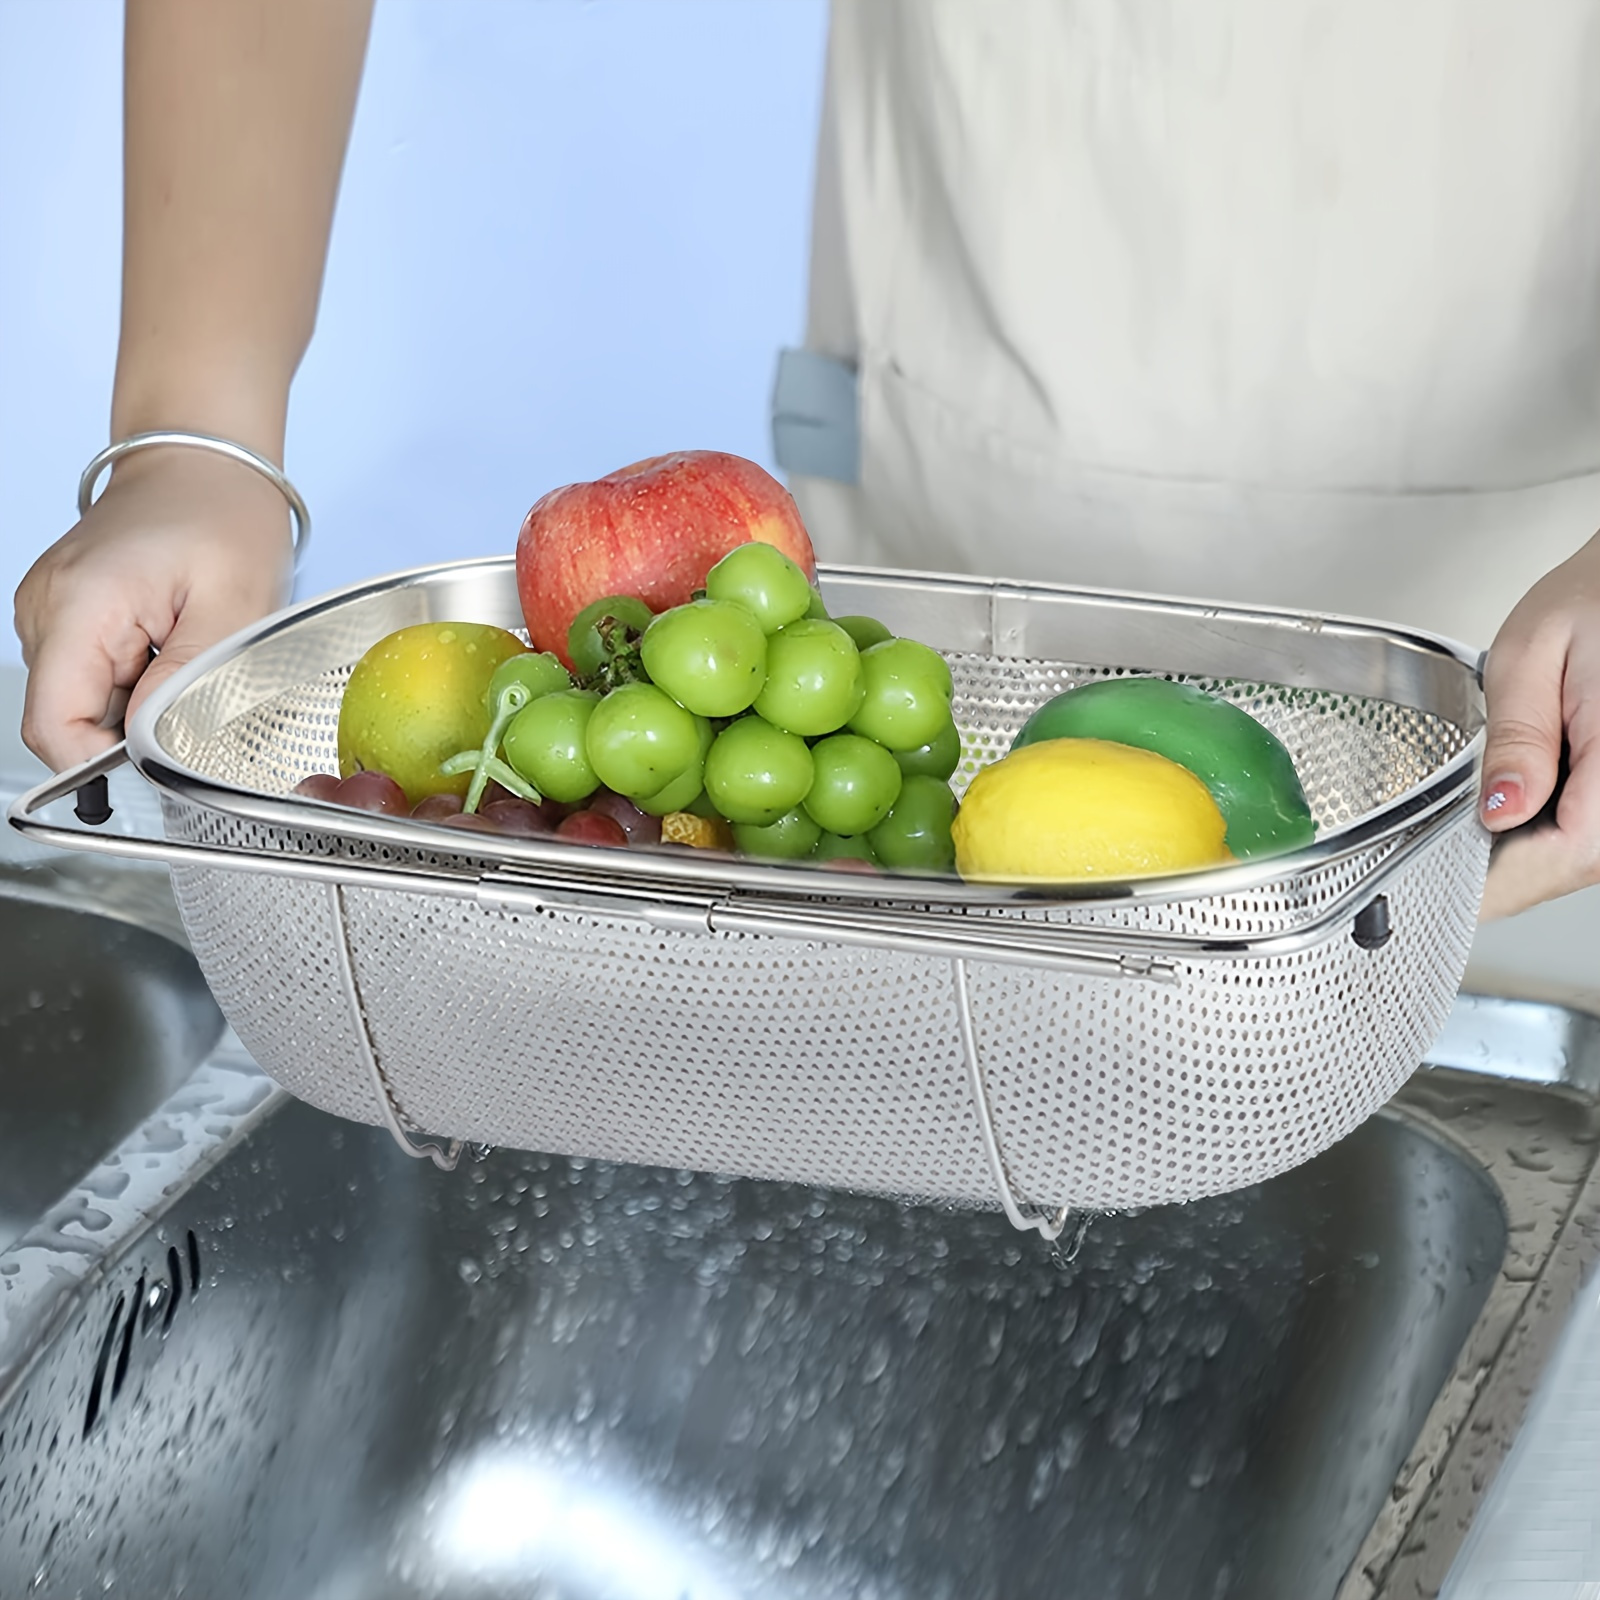 Dish Drying Rack, Kitchen Counter Dish Drainers Rack, Auto-Drain Expandable  Strainers over Sink Drying Rack Drainboard - AliExpress